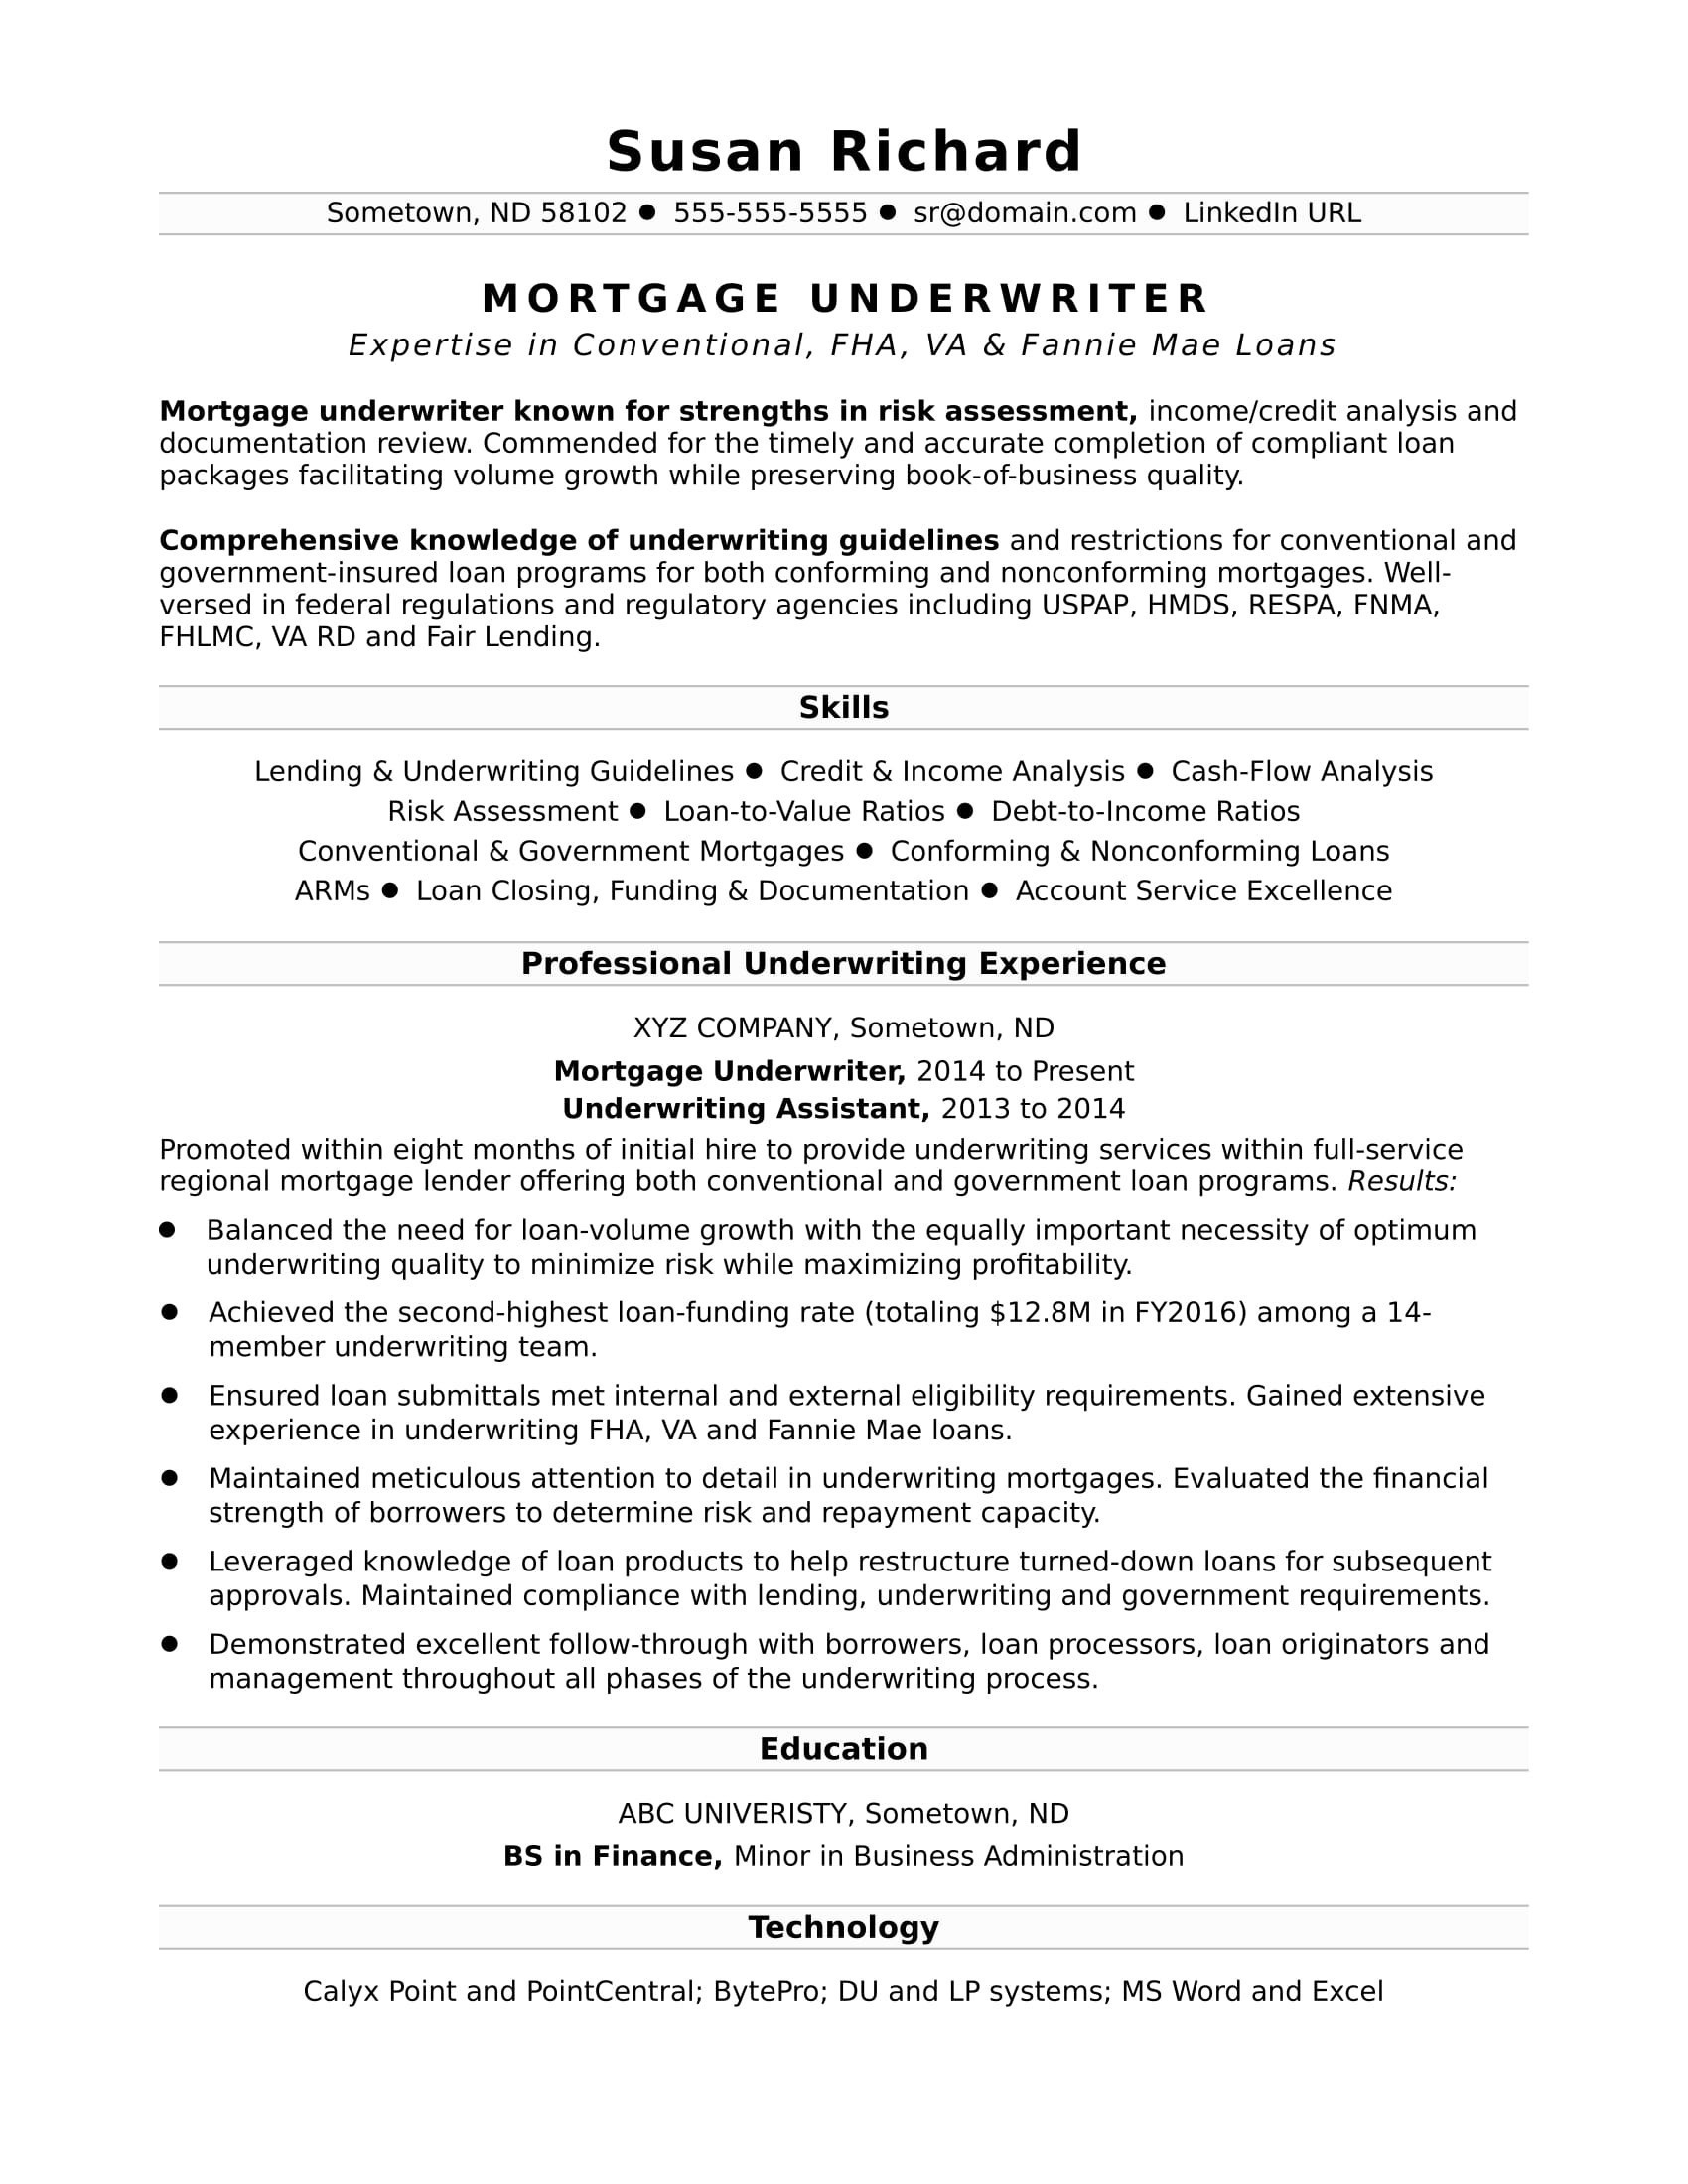 Resume Follow Up Letter Template - Best Follow Up Letter Sample Template